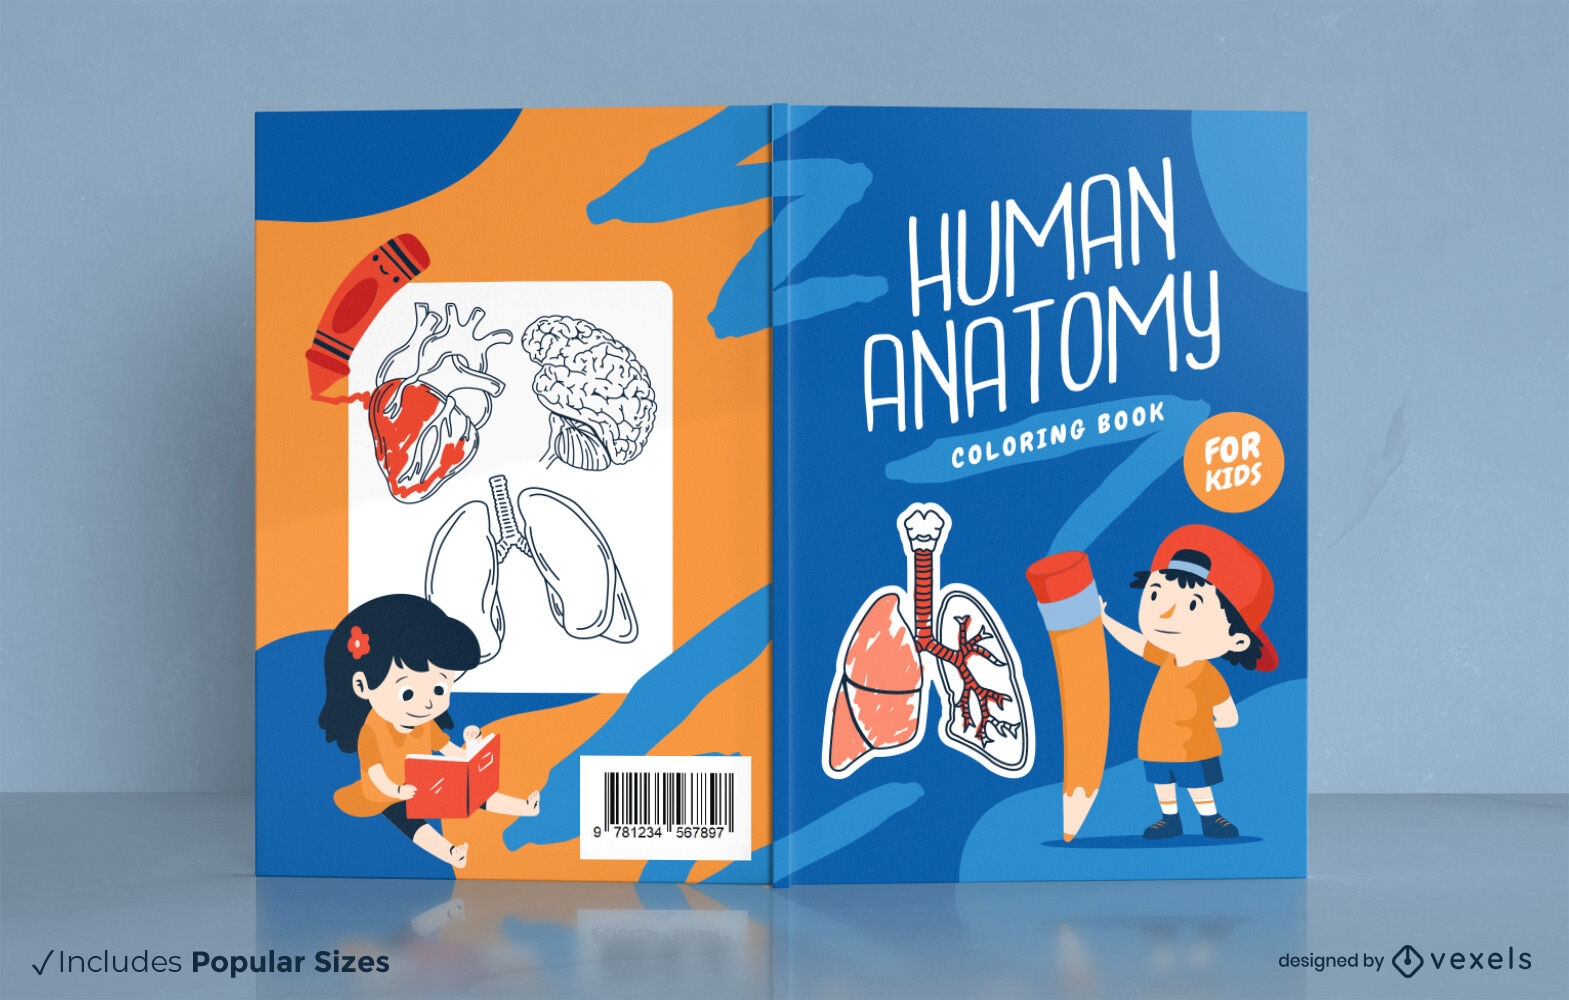 Human anatomy for kids book cover design